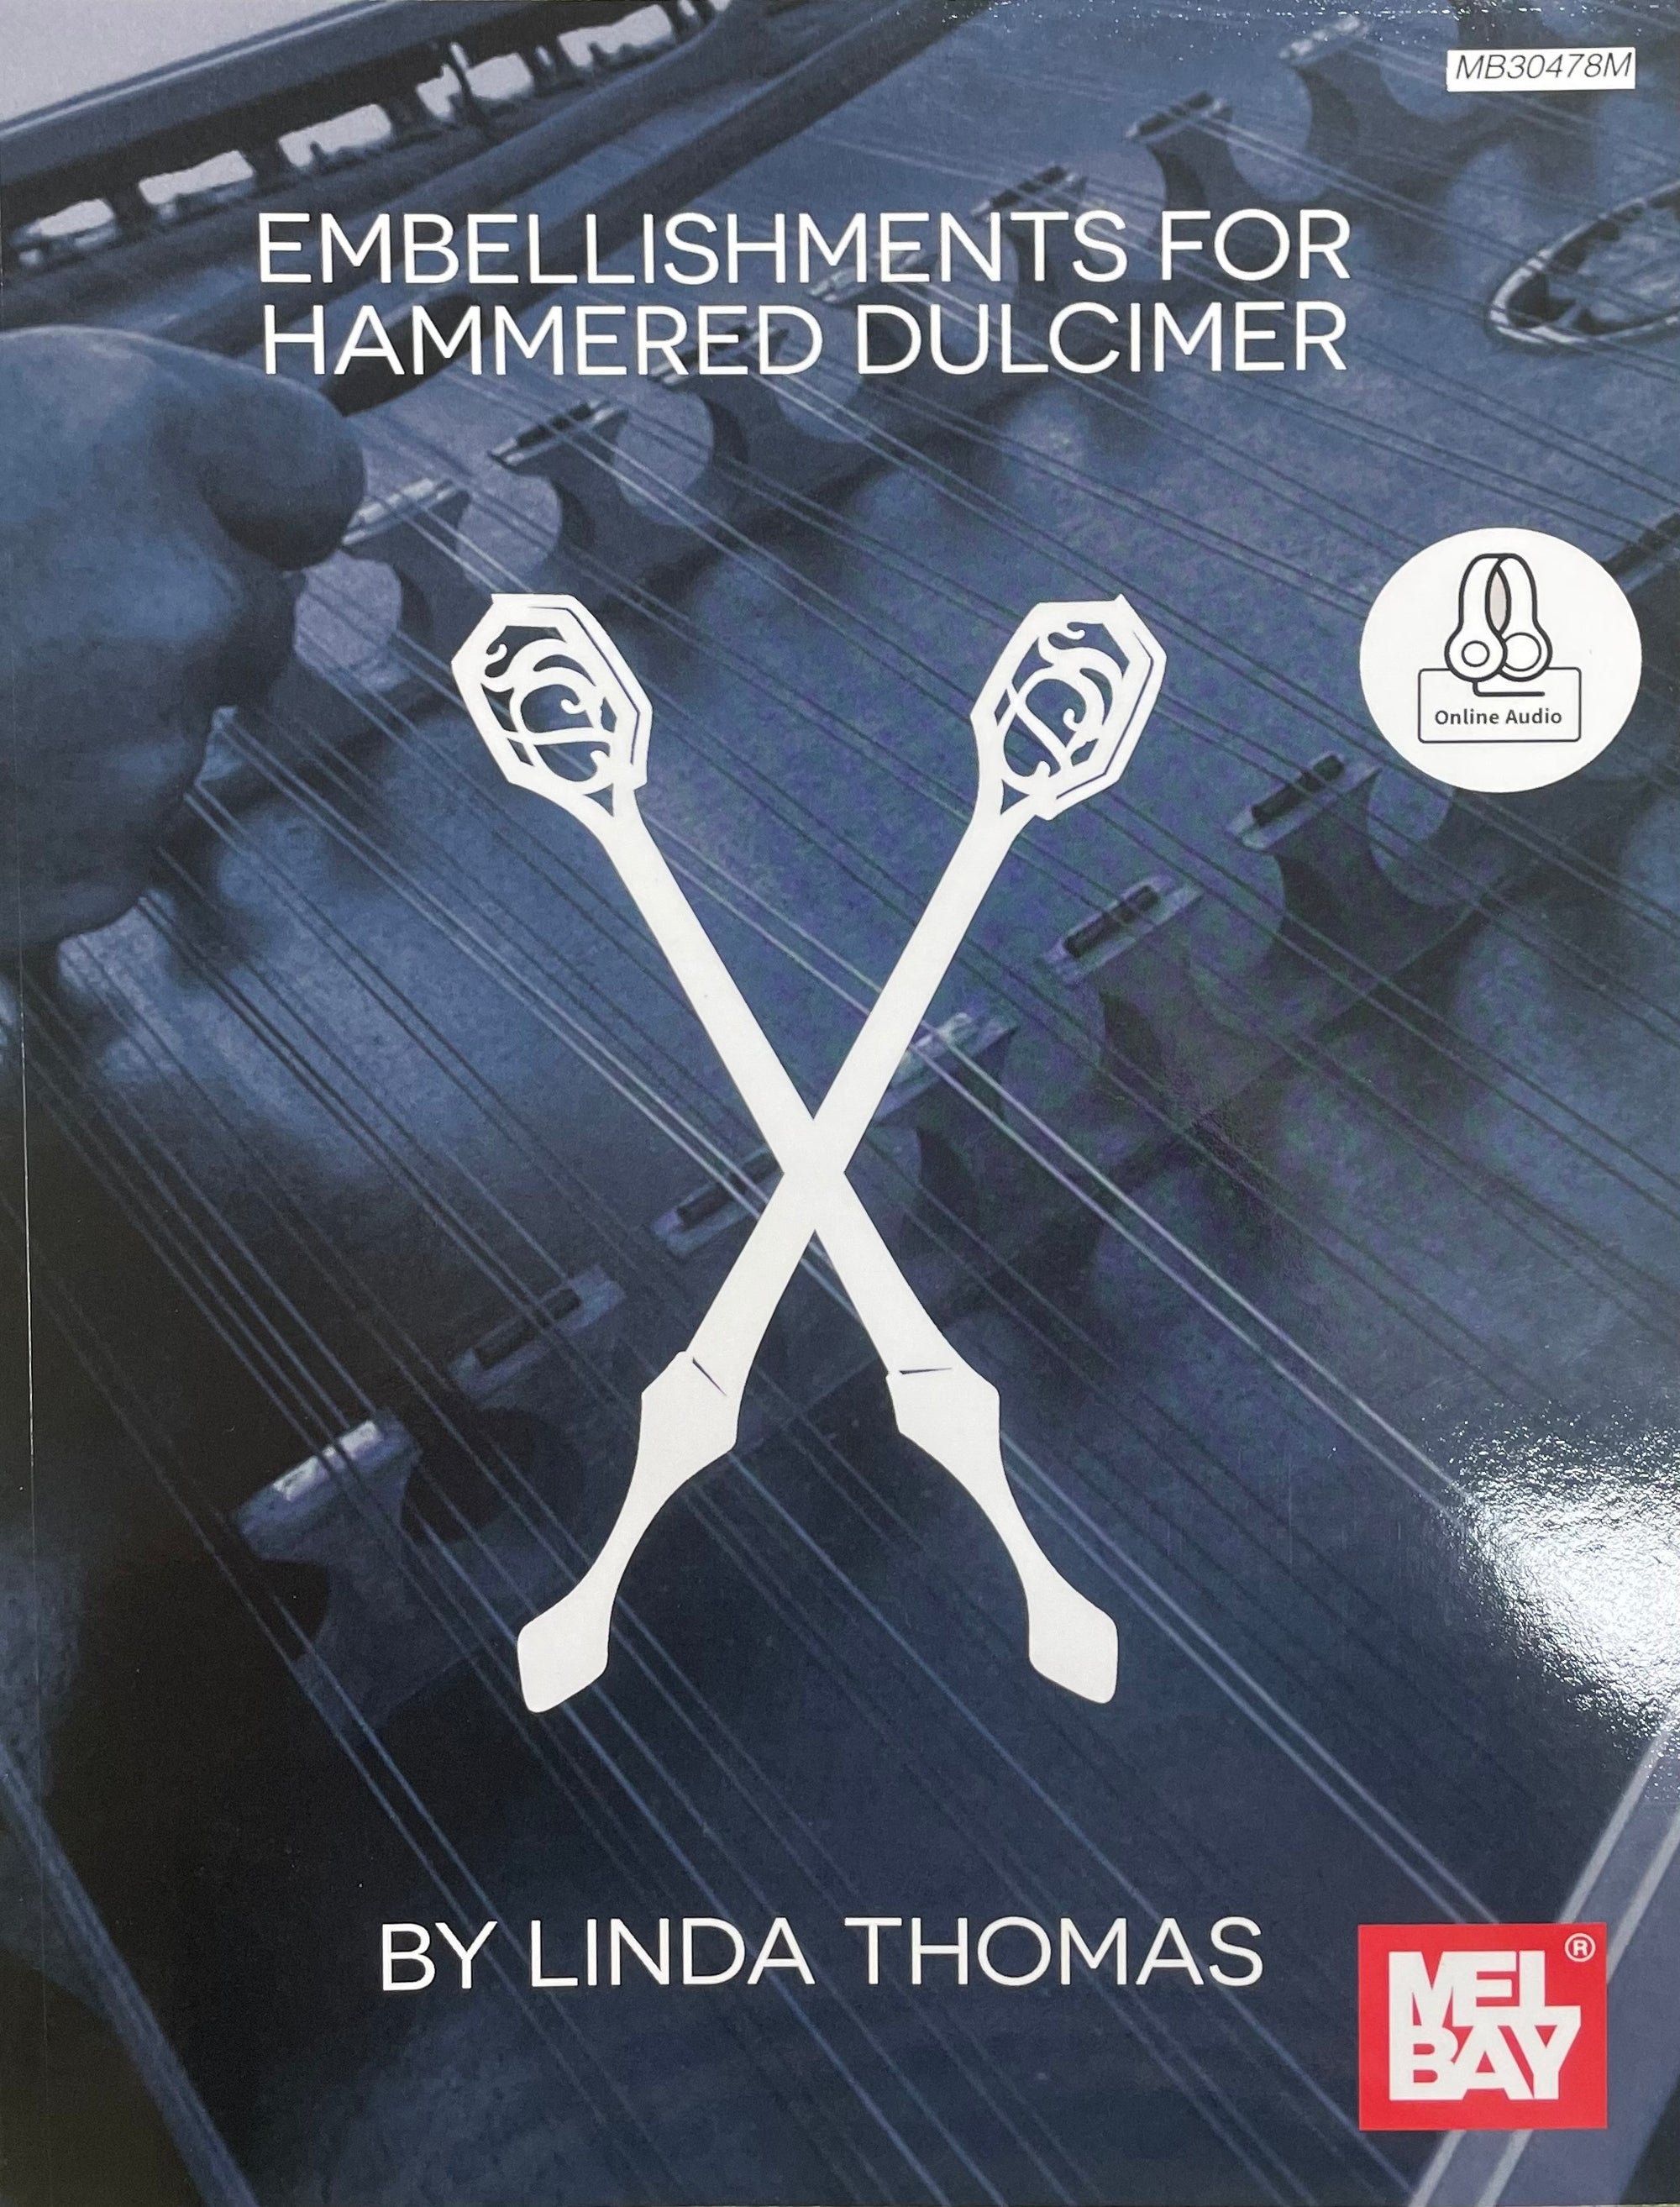 Cover of the book "Embellishments for Hammered Dulcimer by Linda Thomas," featuring two crossed dulcimer hammers, decorative embellishments, and the Mel Bay logo at the bottom right corner.